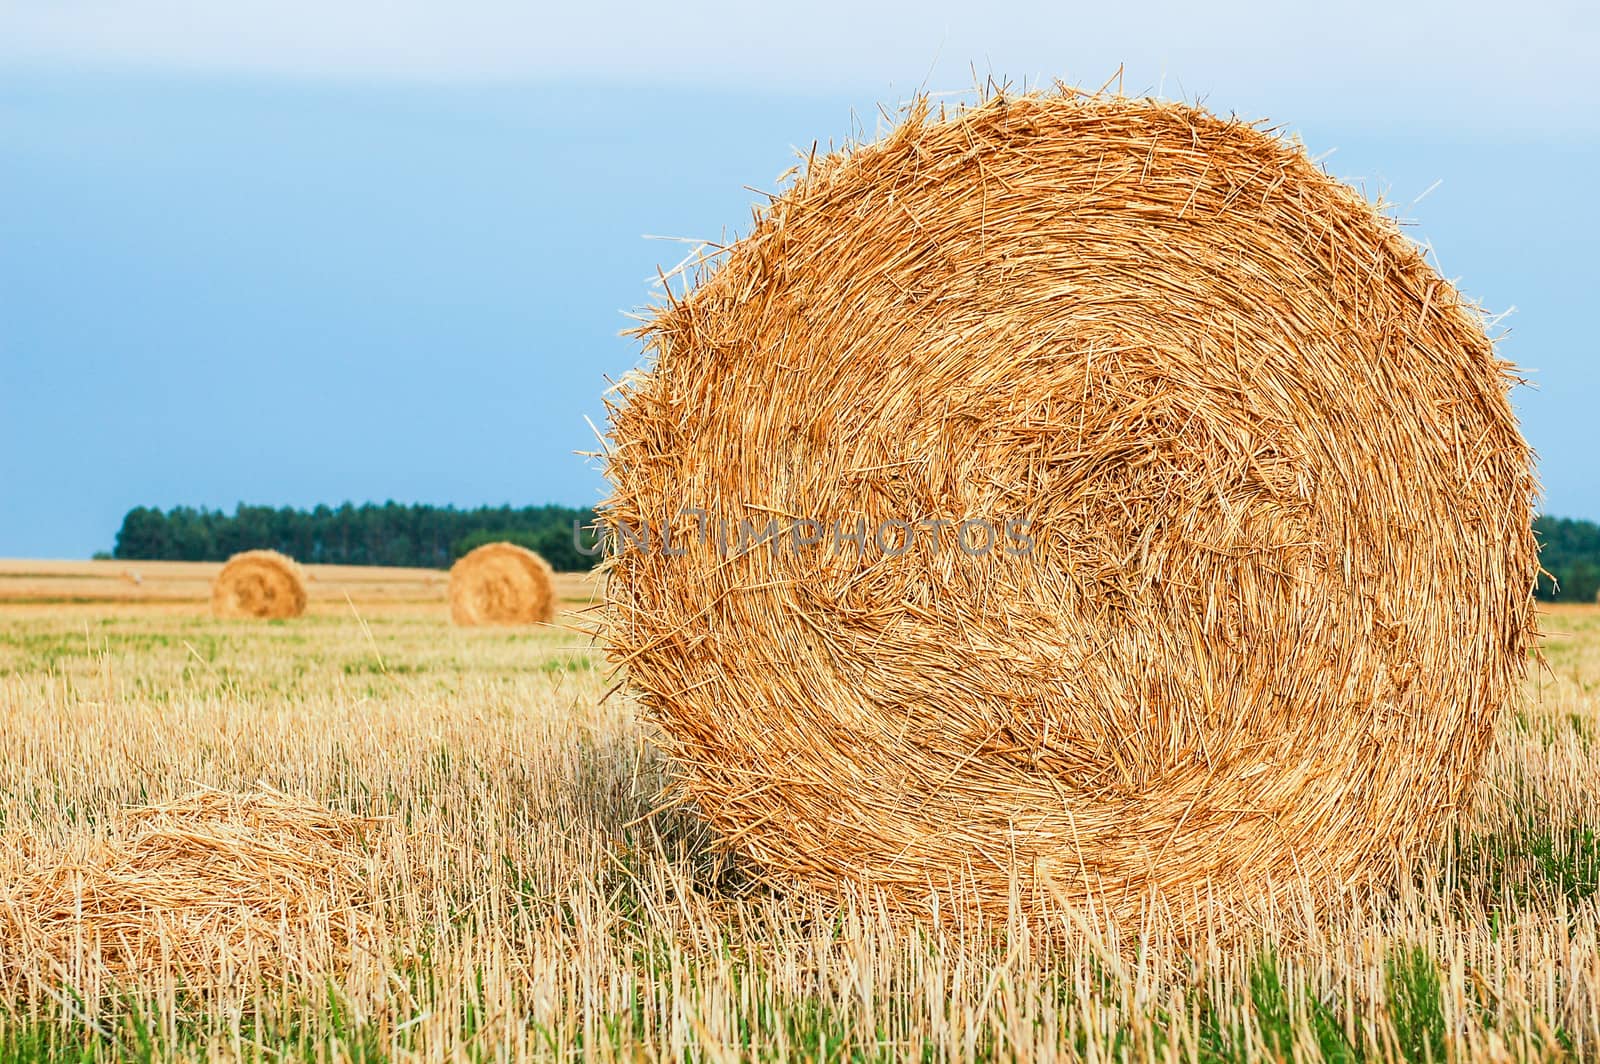 Harvested straw bales in a sunny day